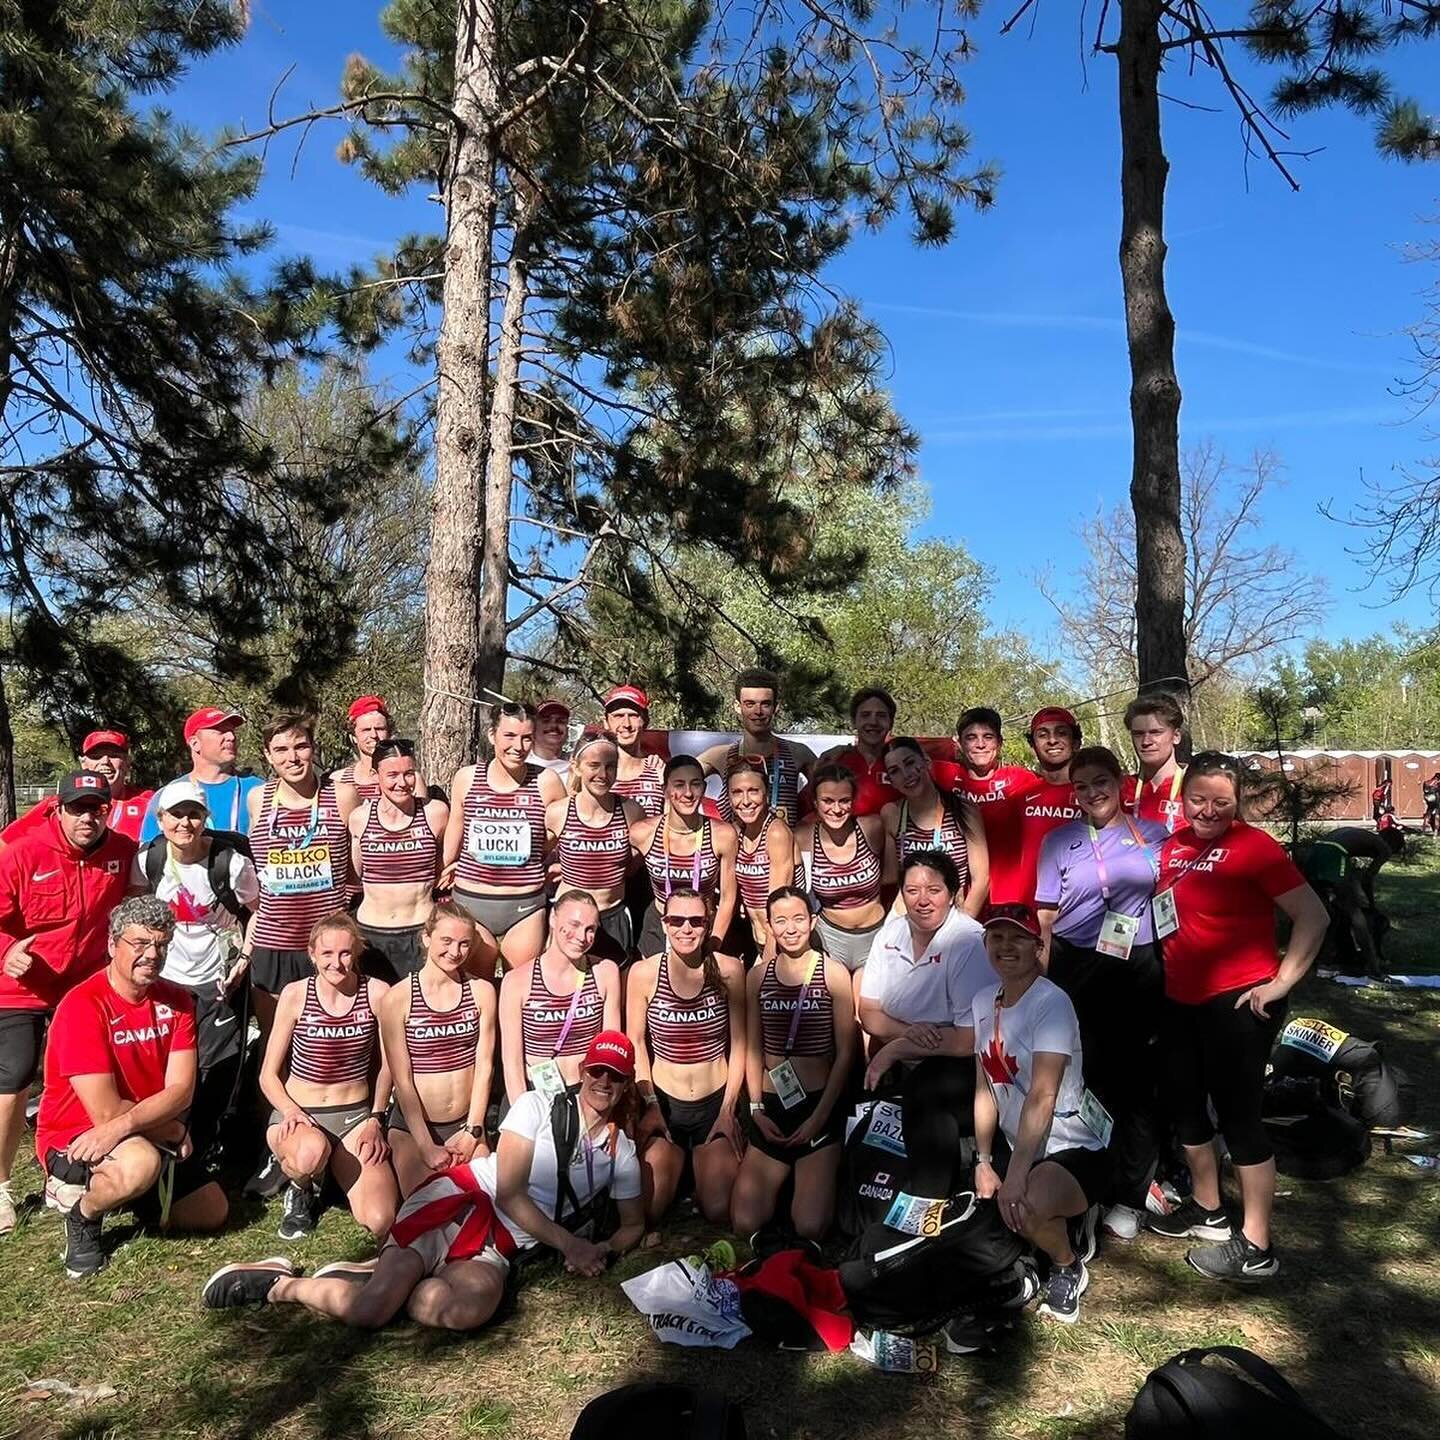 WORLD 🌎 XC CHAMPS:
.
Another fun adventure with @athleticscanada in Belgrade, Serbia 🇷🇸 for the World 🌎 Cross Country Championships. 
.
I had a blast with our IST team and always fun to support our Canadian 🇨🇦 athletes. They were a gritty tough